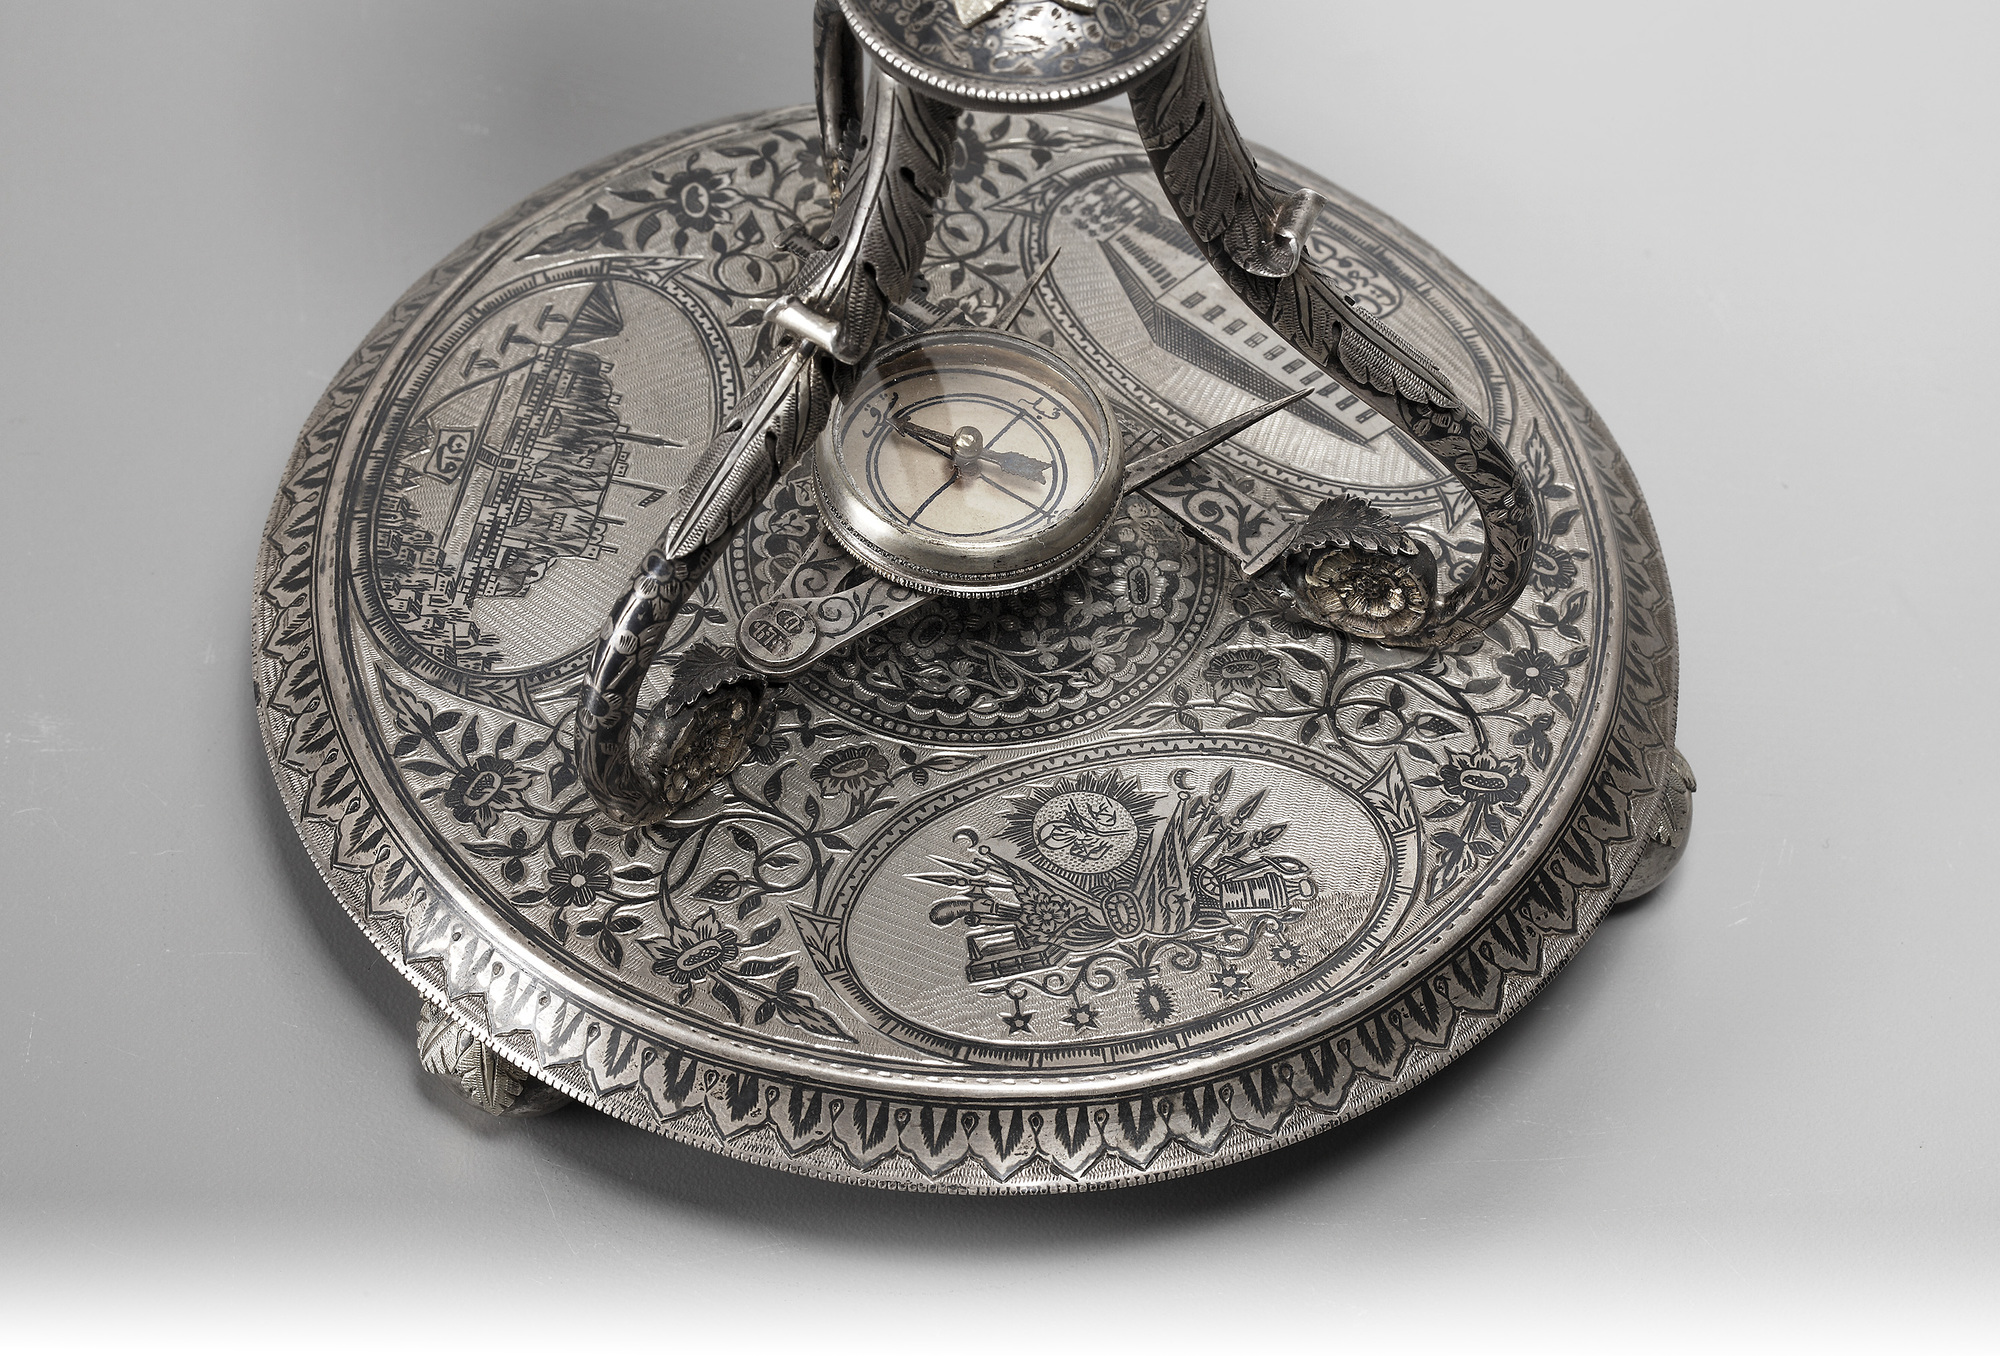 AN OTTOMAN SILVER, NIELLOED AND ENGRAVED GLOBE CLOCK BEARING THE TUGHRA OF SULTAN ABDULHAMID II TURK - Image 15 of 18